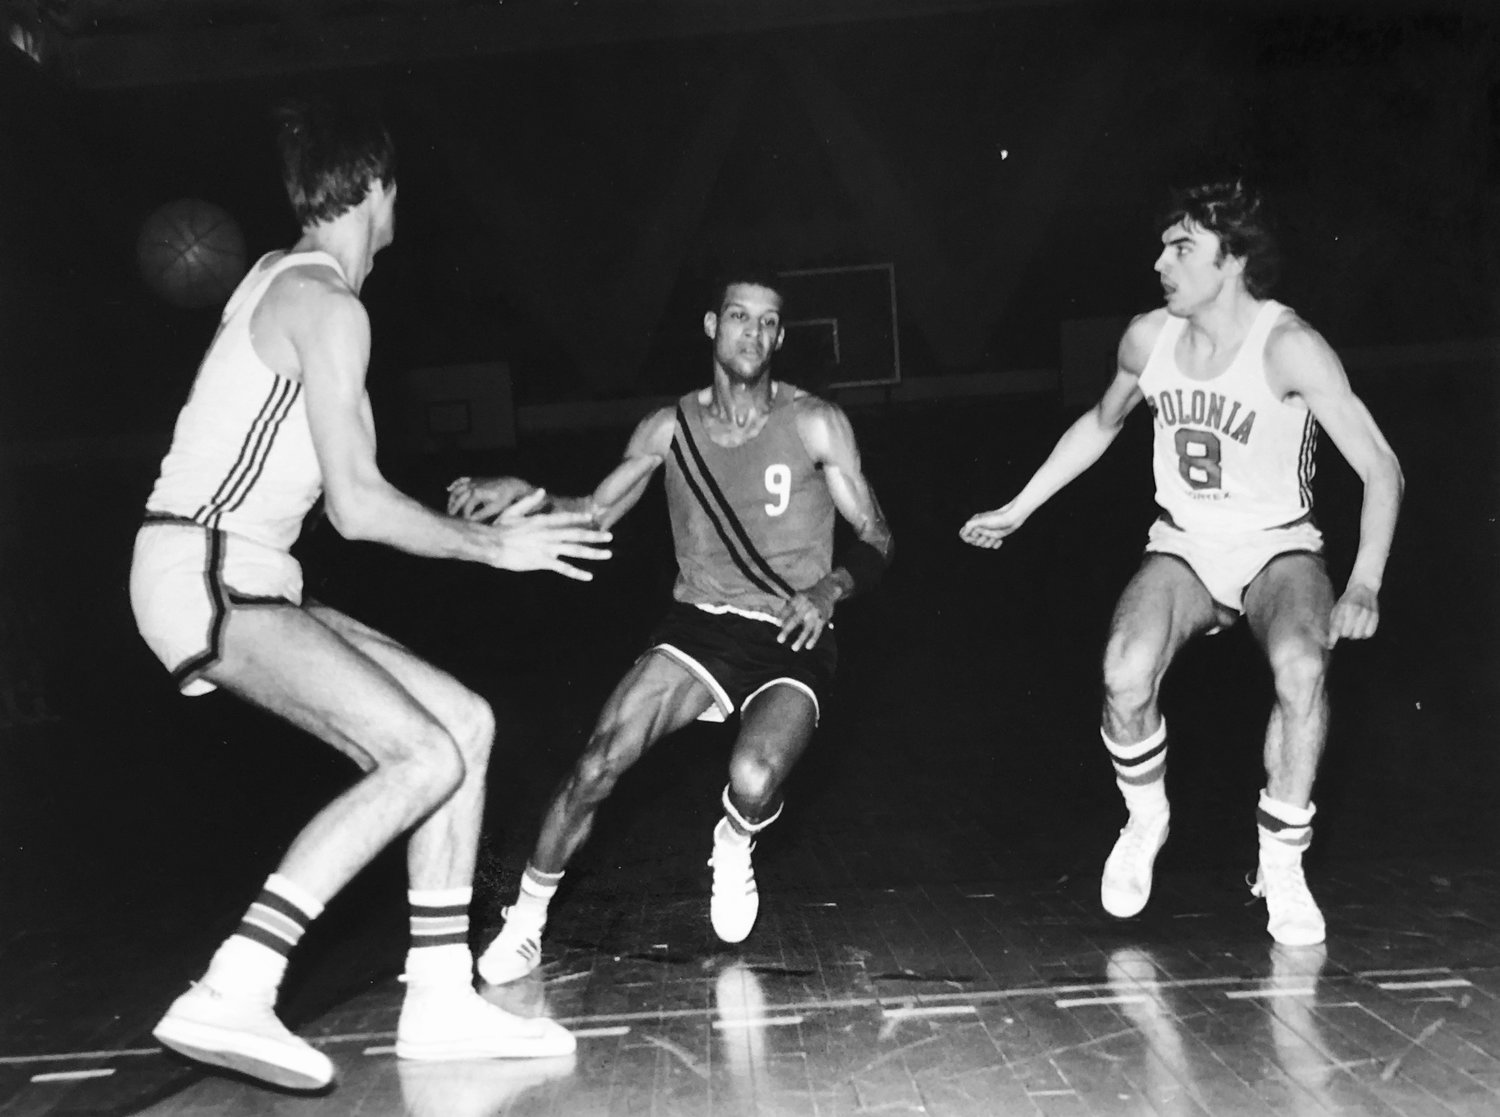 Kent Washington in action against Polonia, a rival team in the Polish Basketball League. In 1979, he became the first American pro to sign up behind the iron curtain.